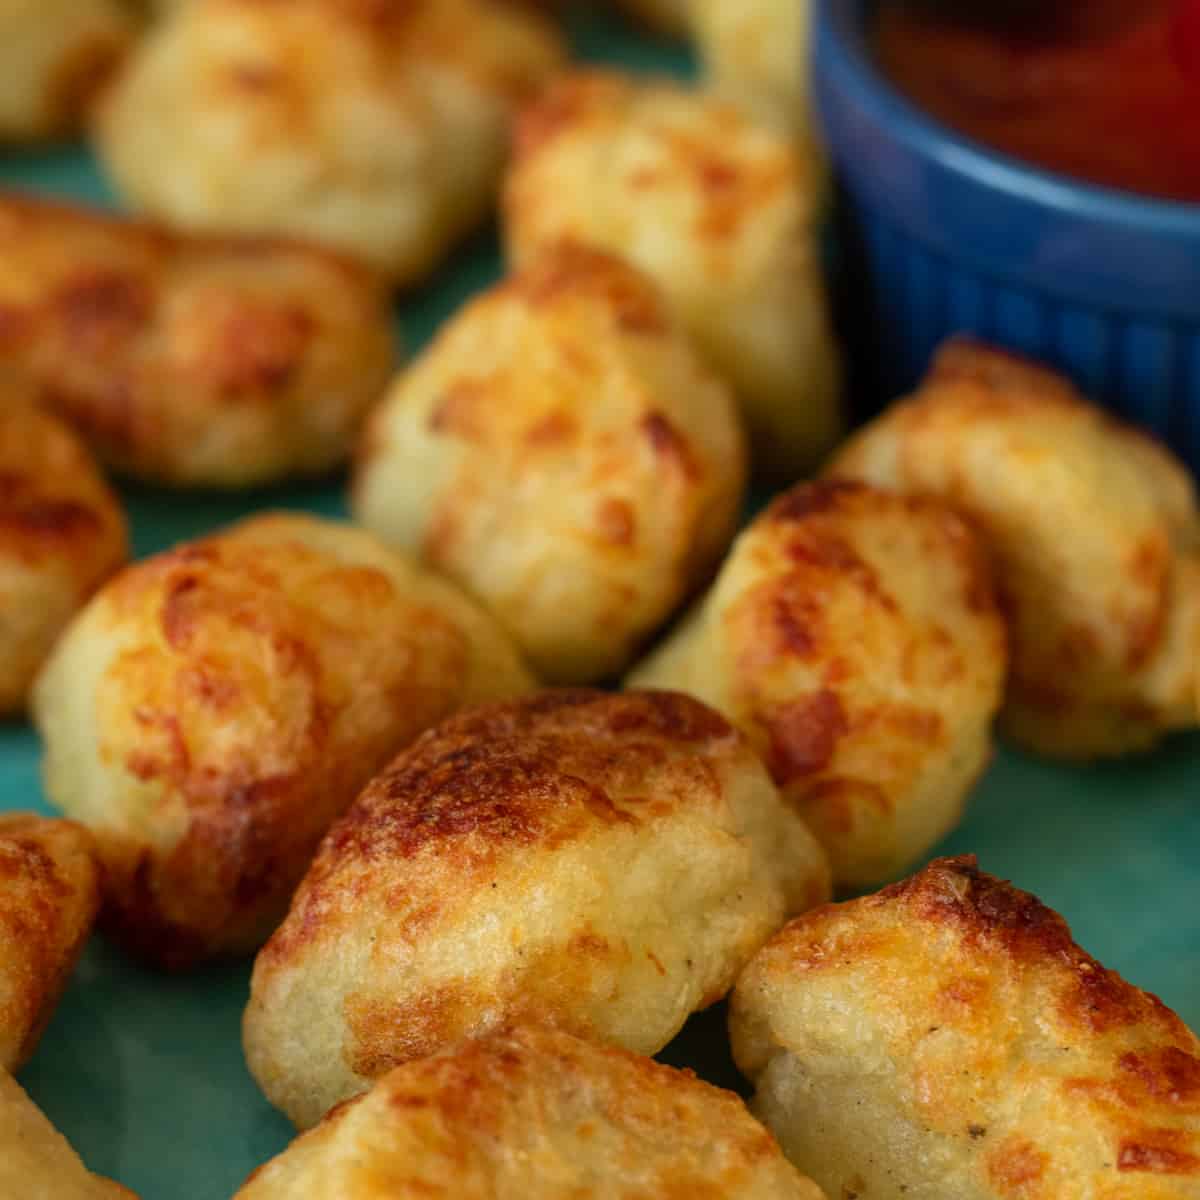 air fryer tater tots next to a small bowl with ketchup